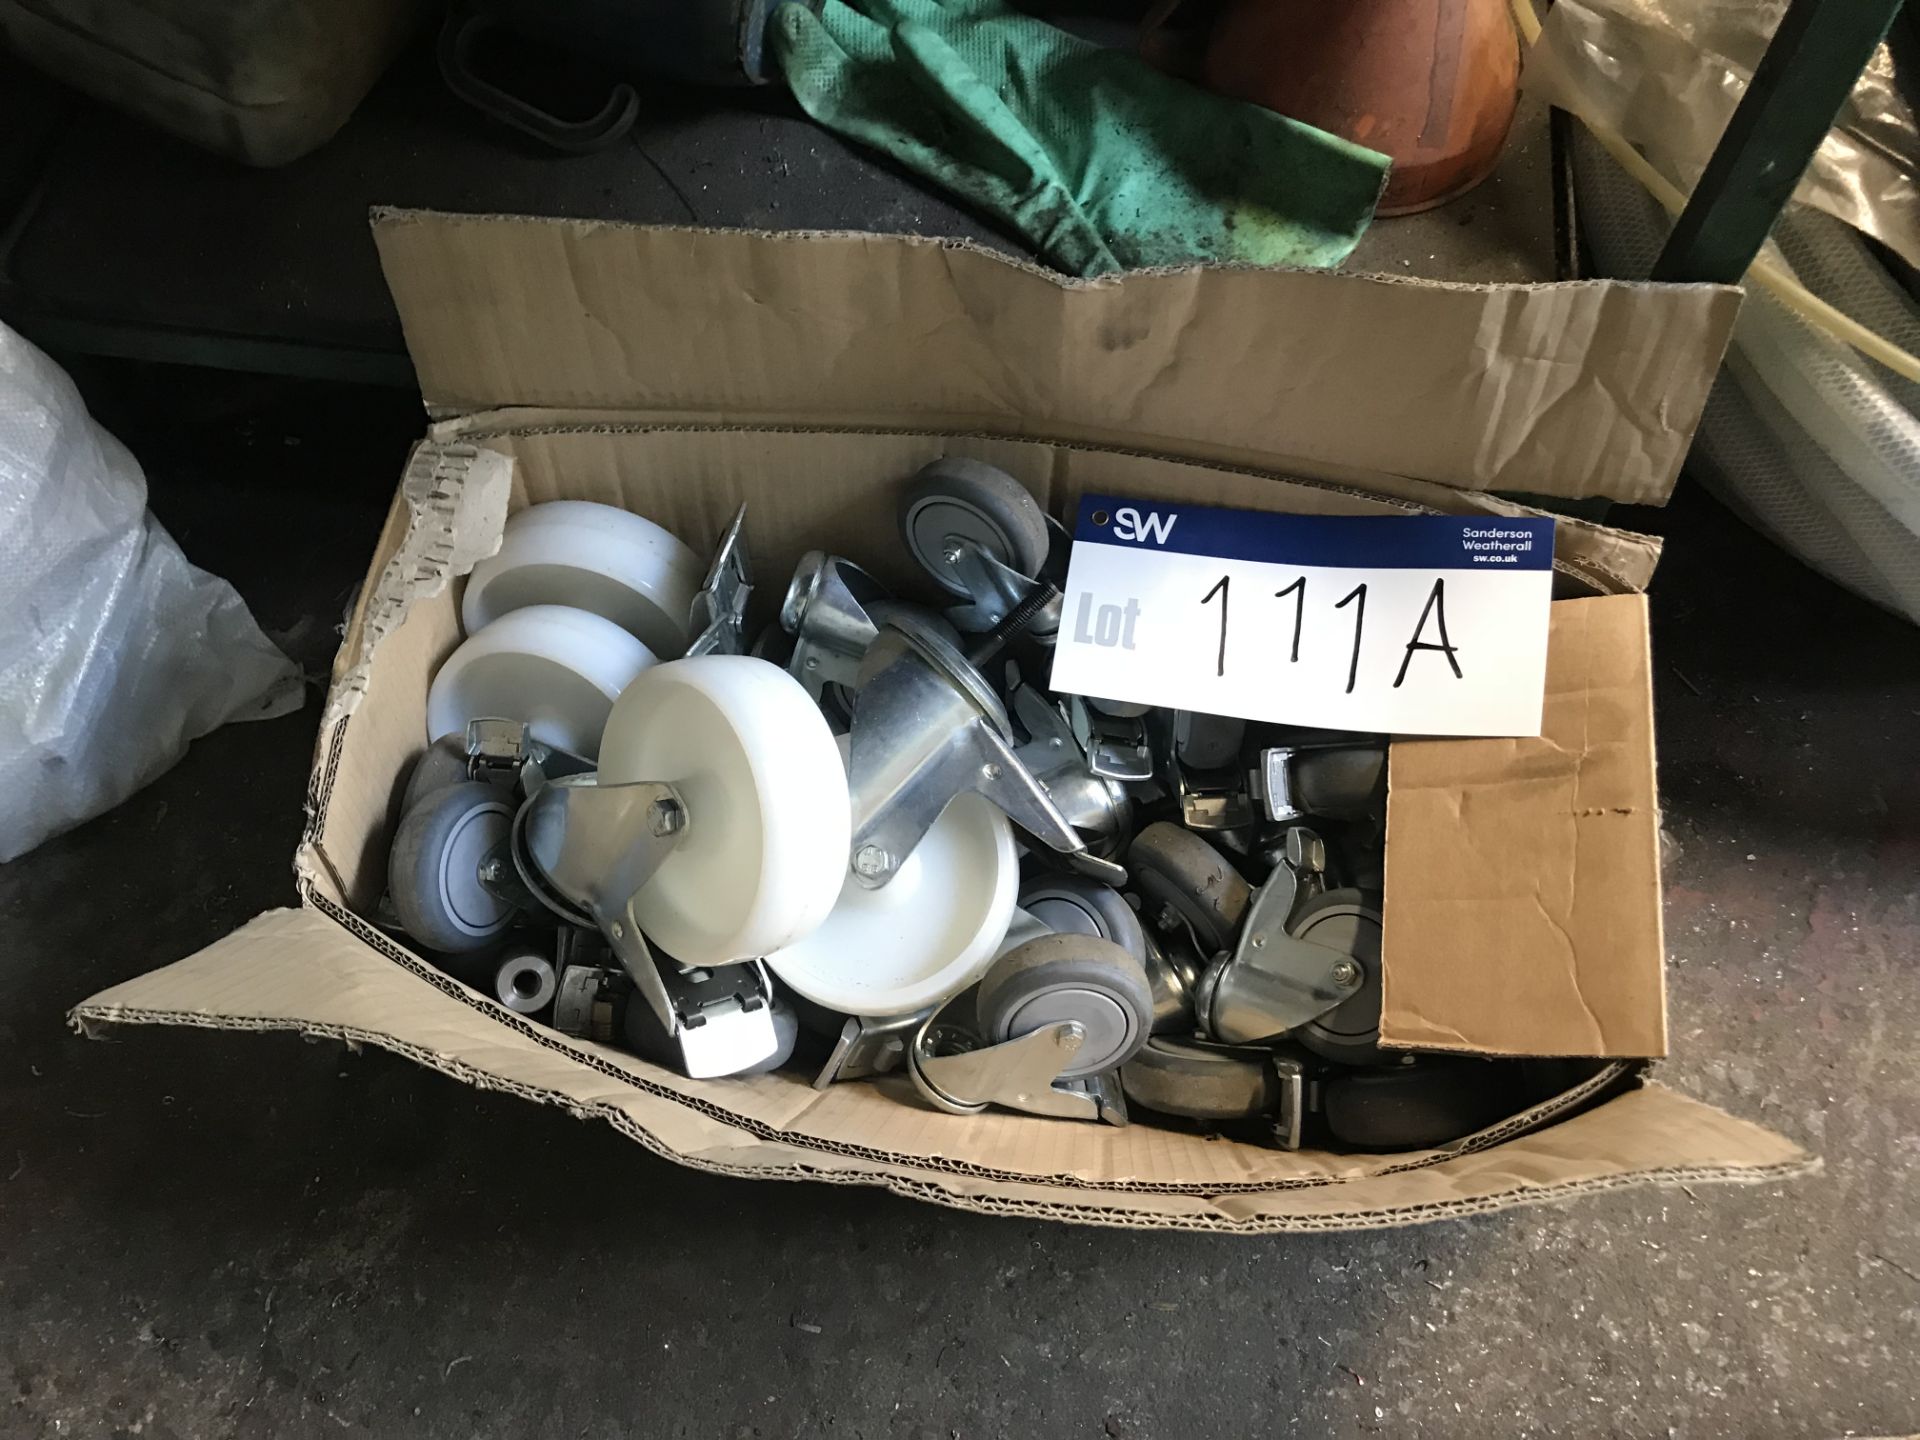 Quantity of Casters in Box